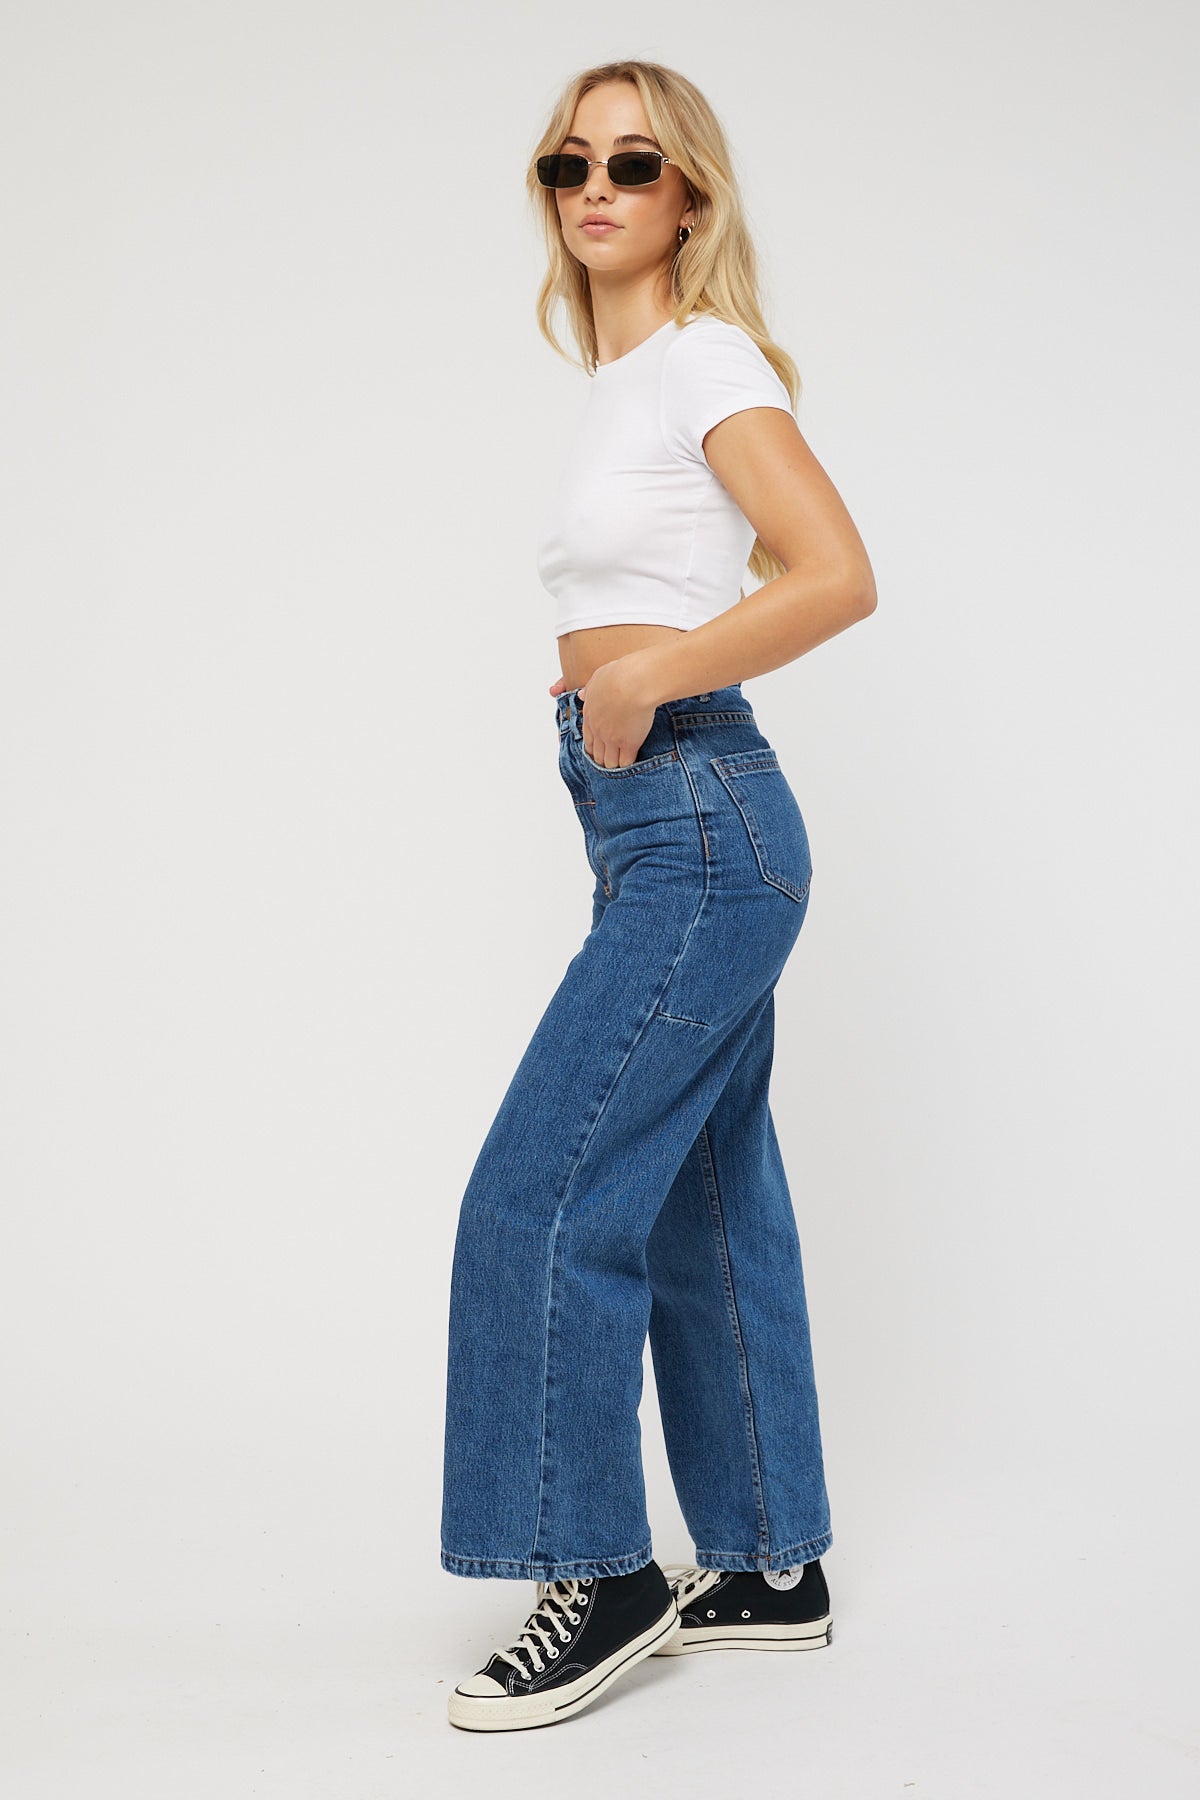 Thrills Holly Jean Rinsed Blue – Universal Store